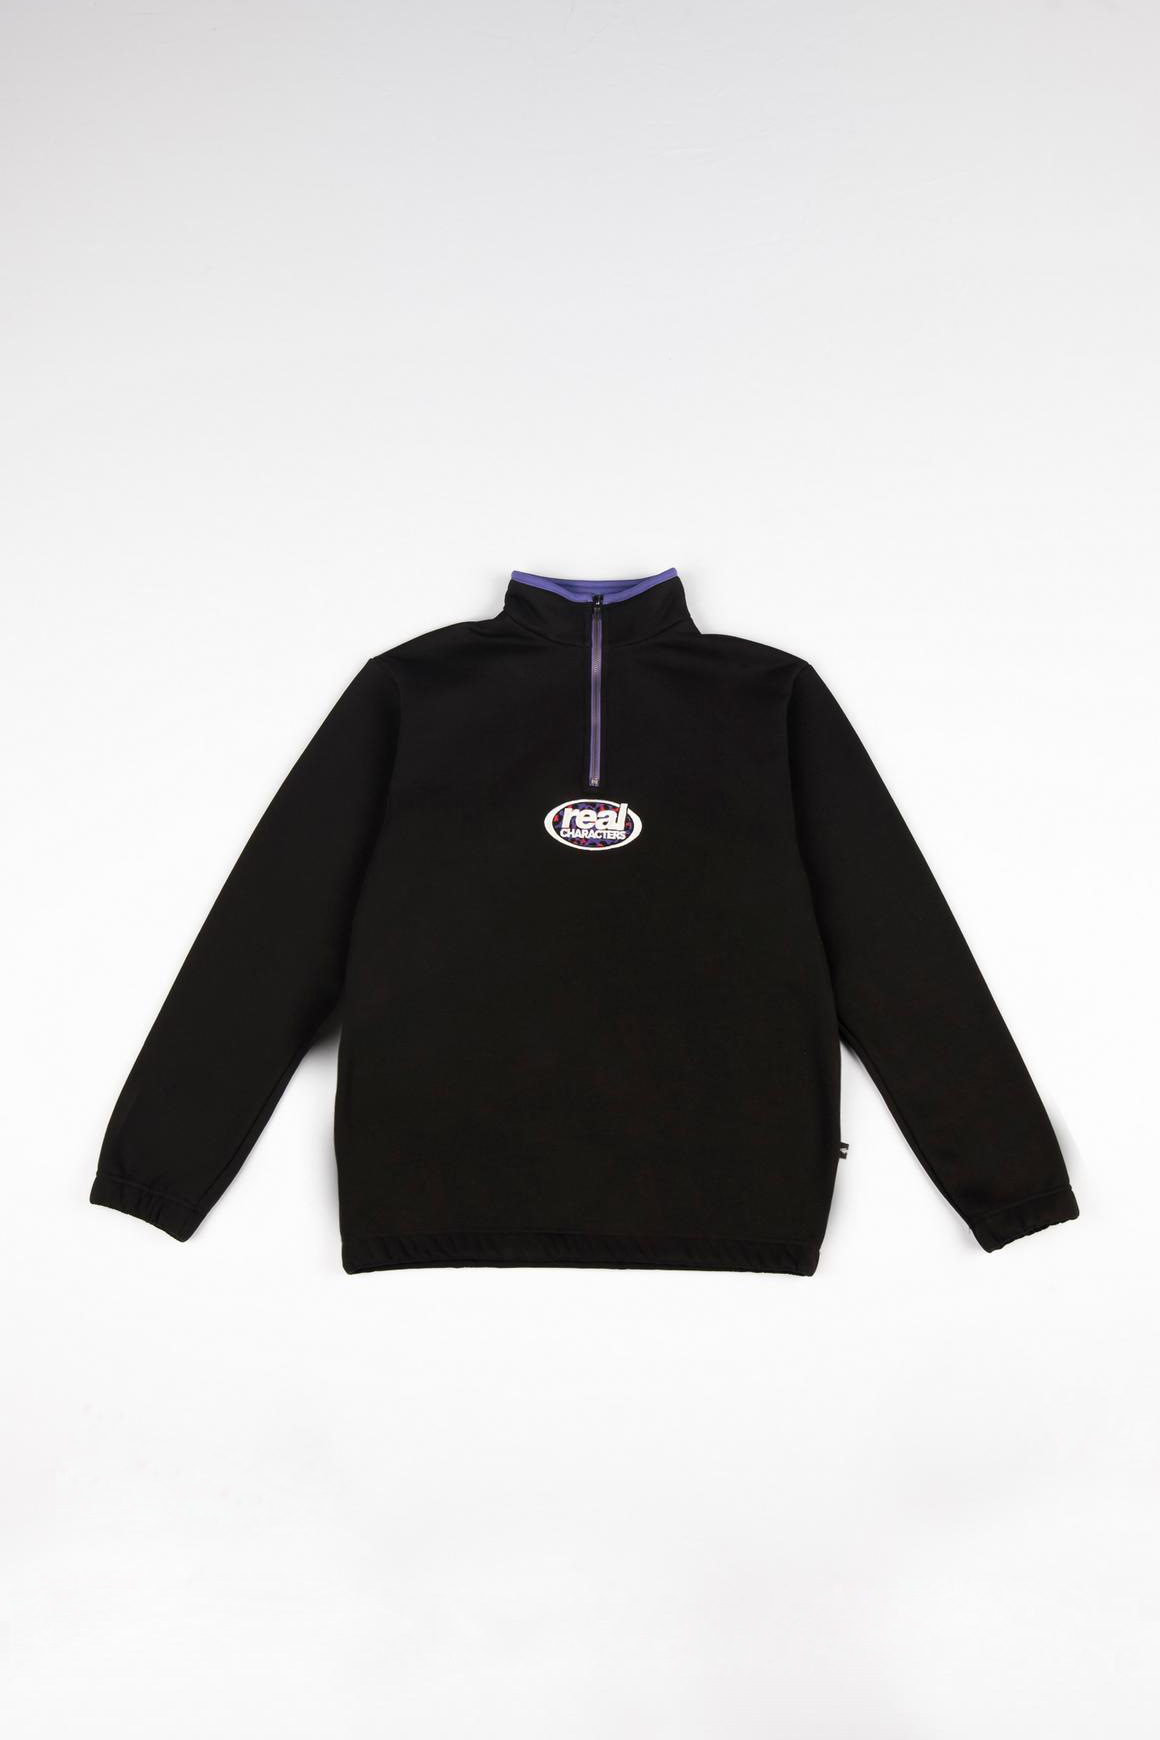 RARE ONE-OFFs Black Half-Zip - Real Characters